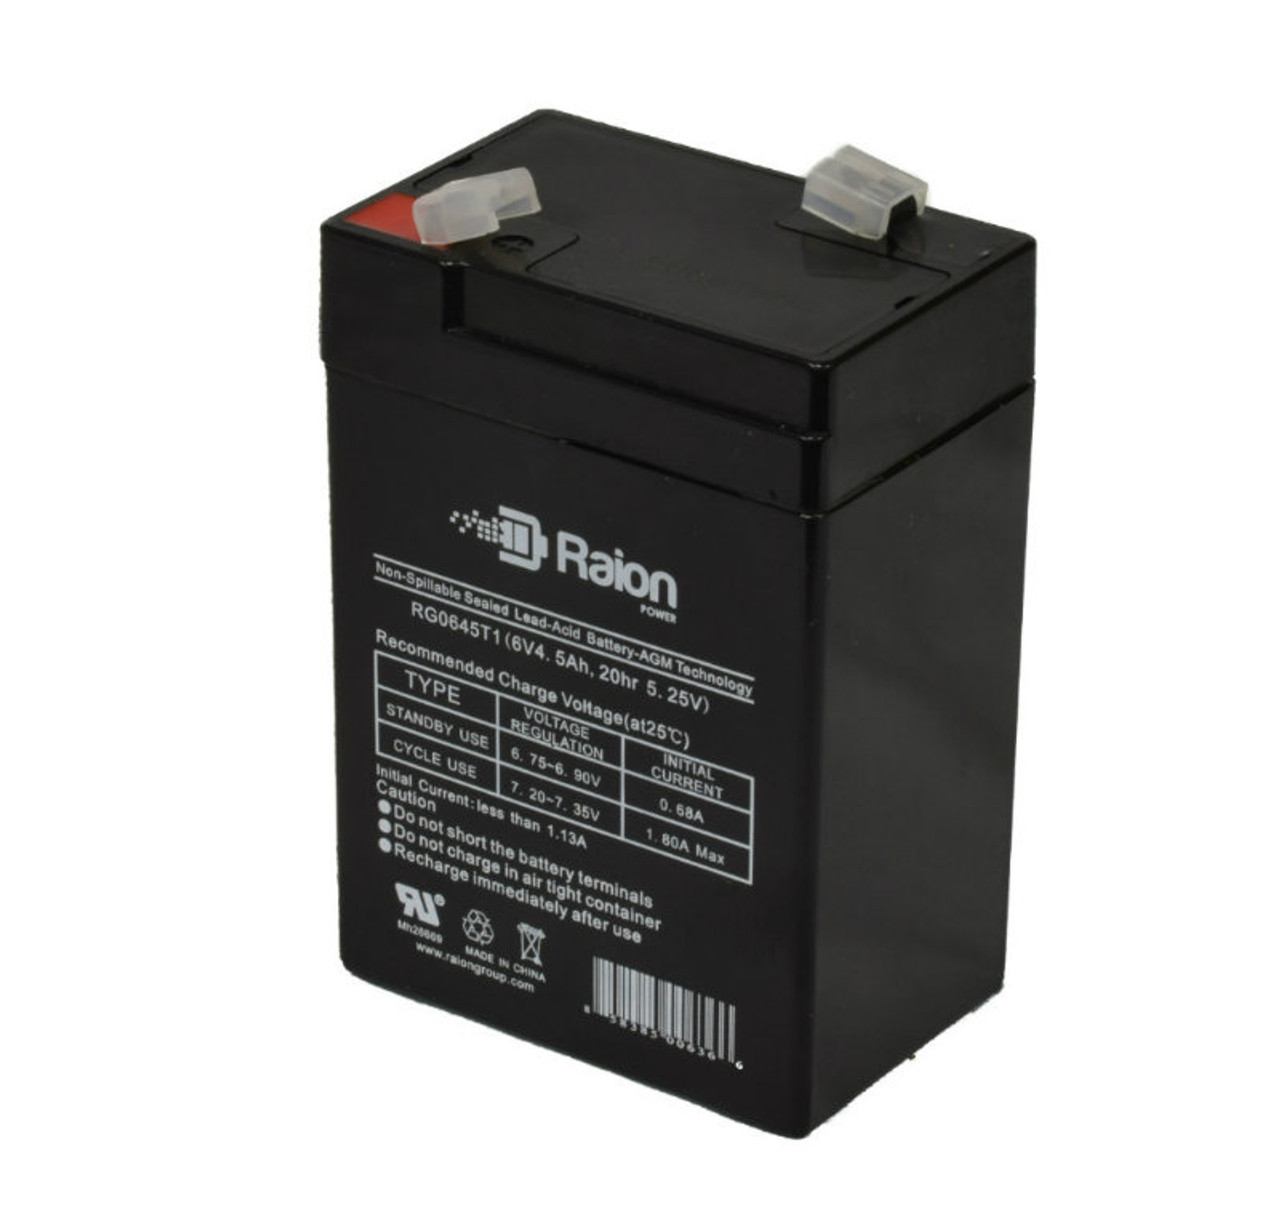 Raion Power RG0645T1 6V 4.5Ah Replacement Battery Cartridge for Access SLA642